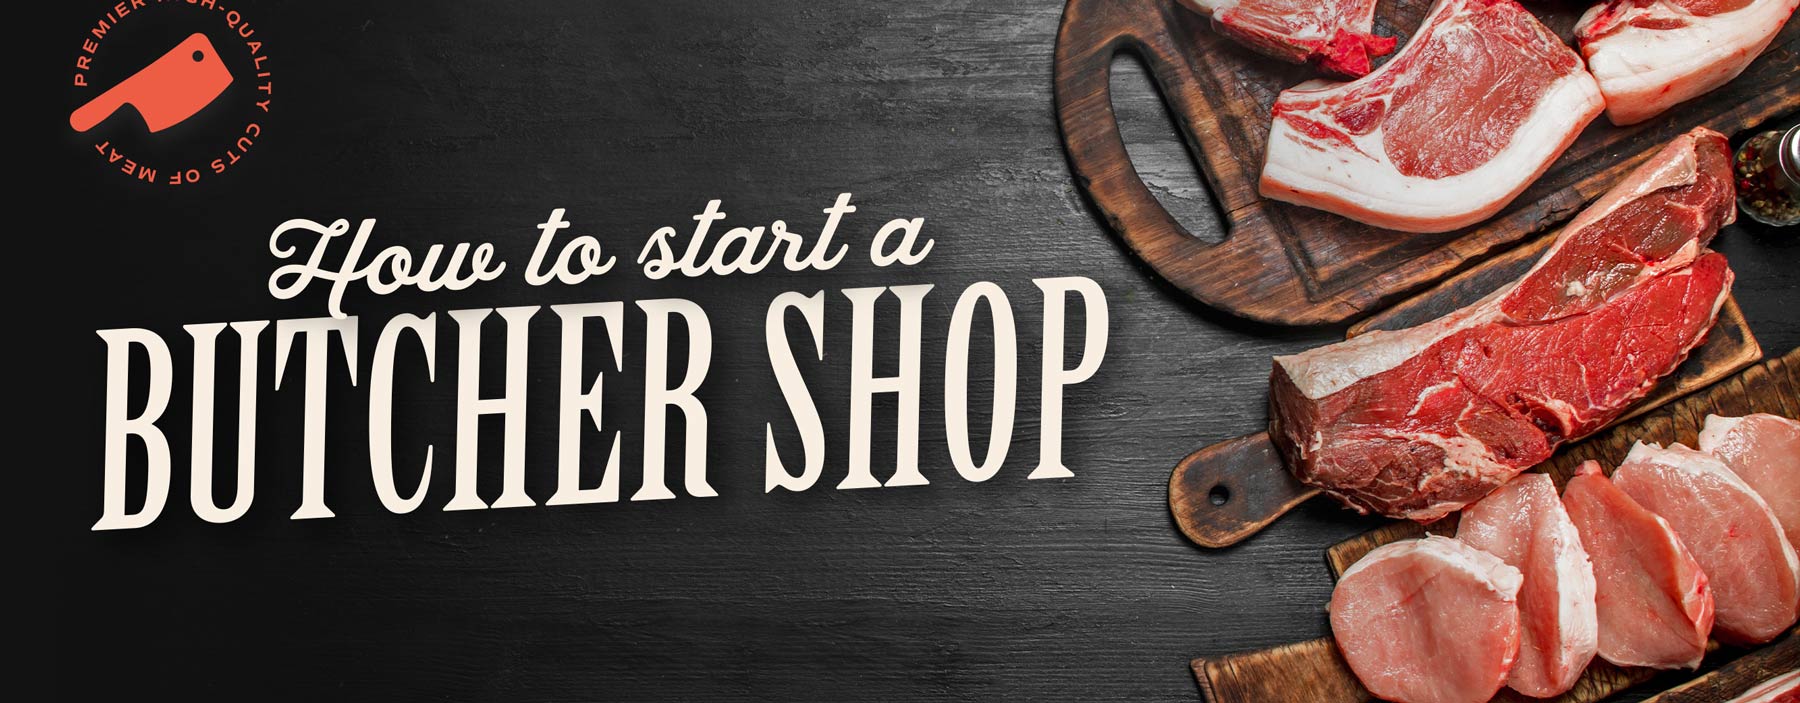 How to Start a Butcher Shop 